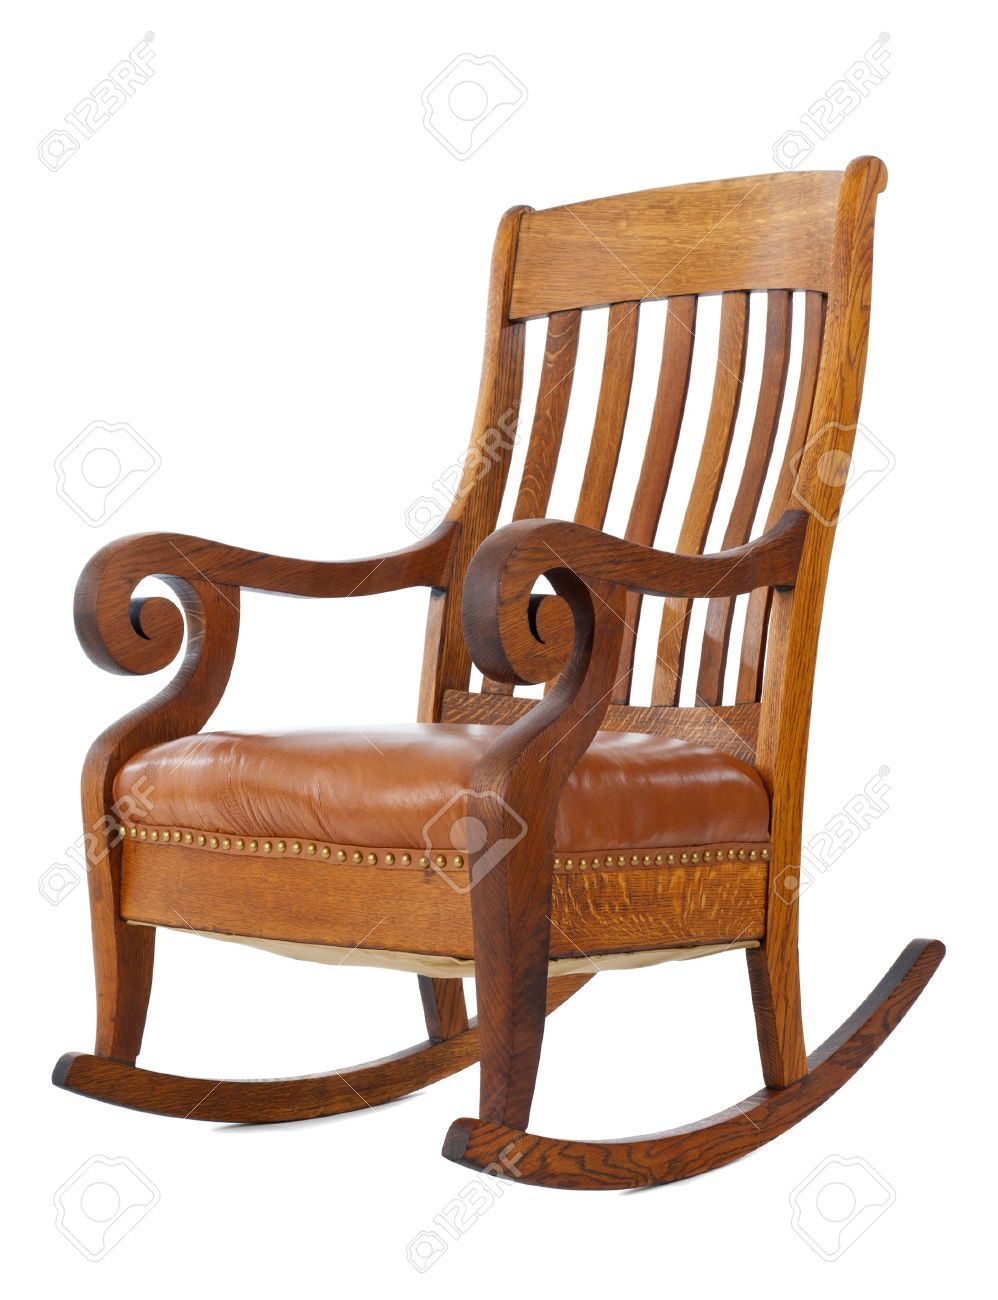 Antique Wooden Rocking Chair Isolated On White Background Pertaining To Antique White Wooden Rocking Chairs (View 8 of 20)